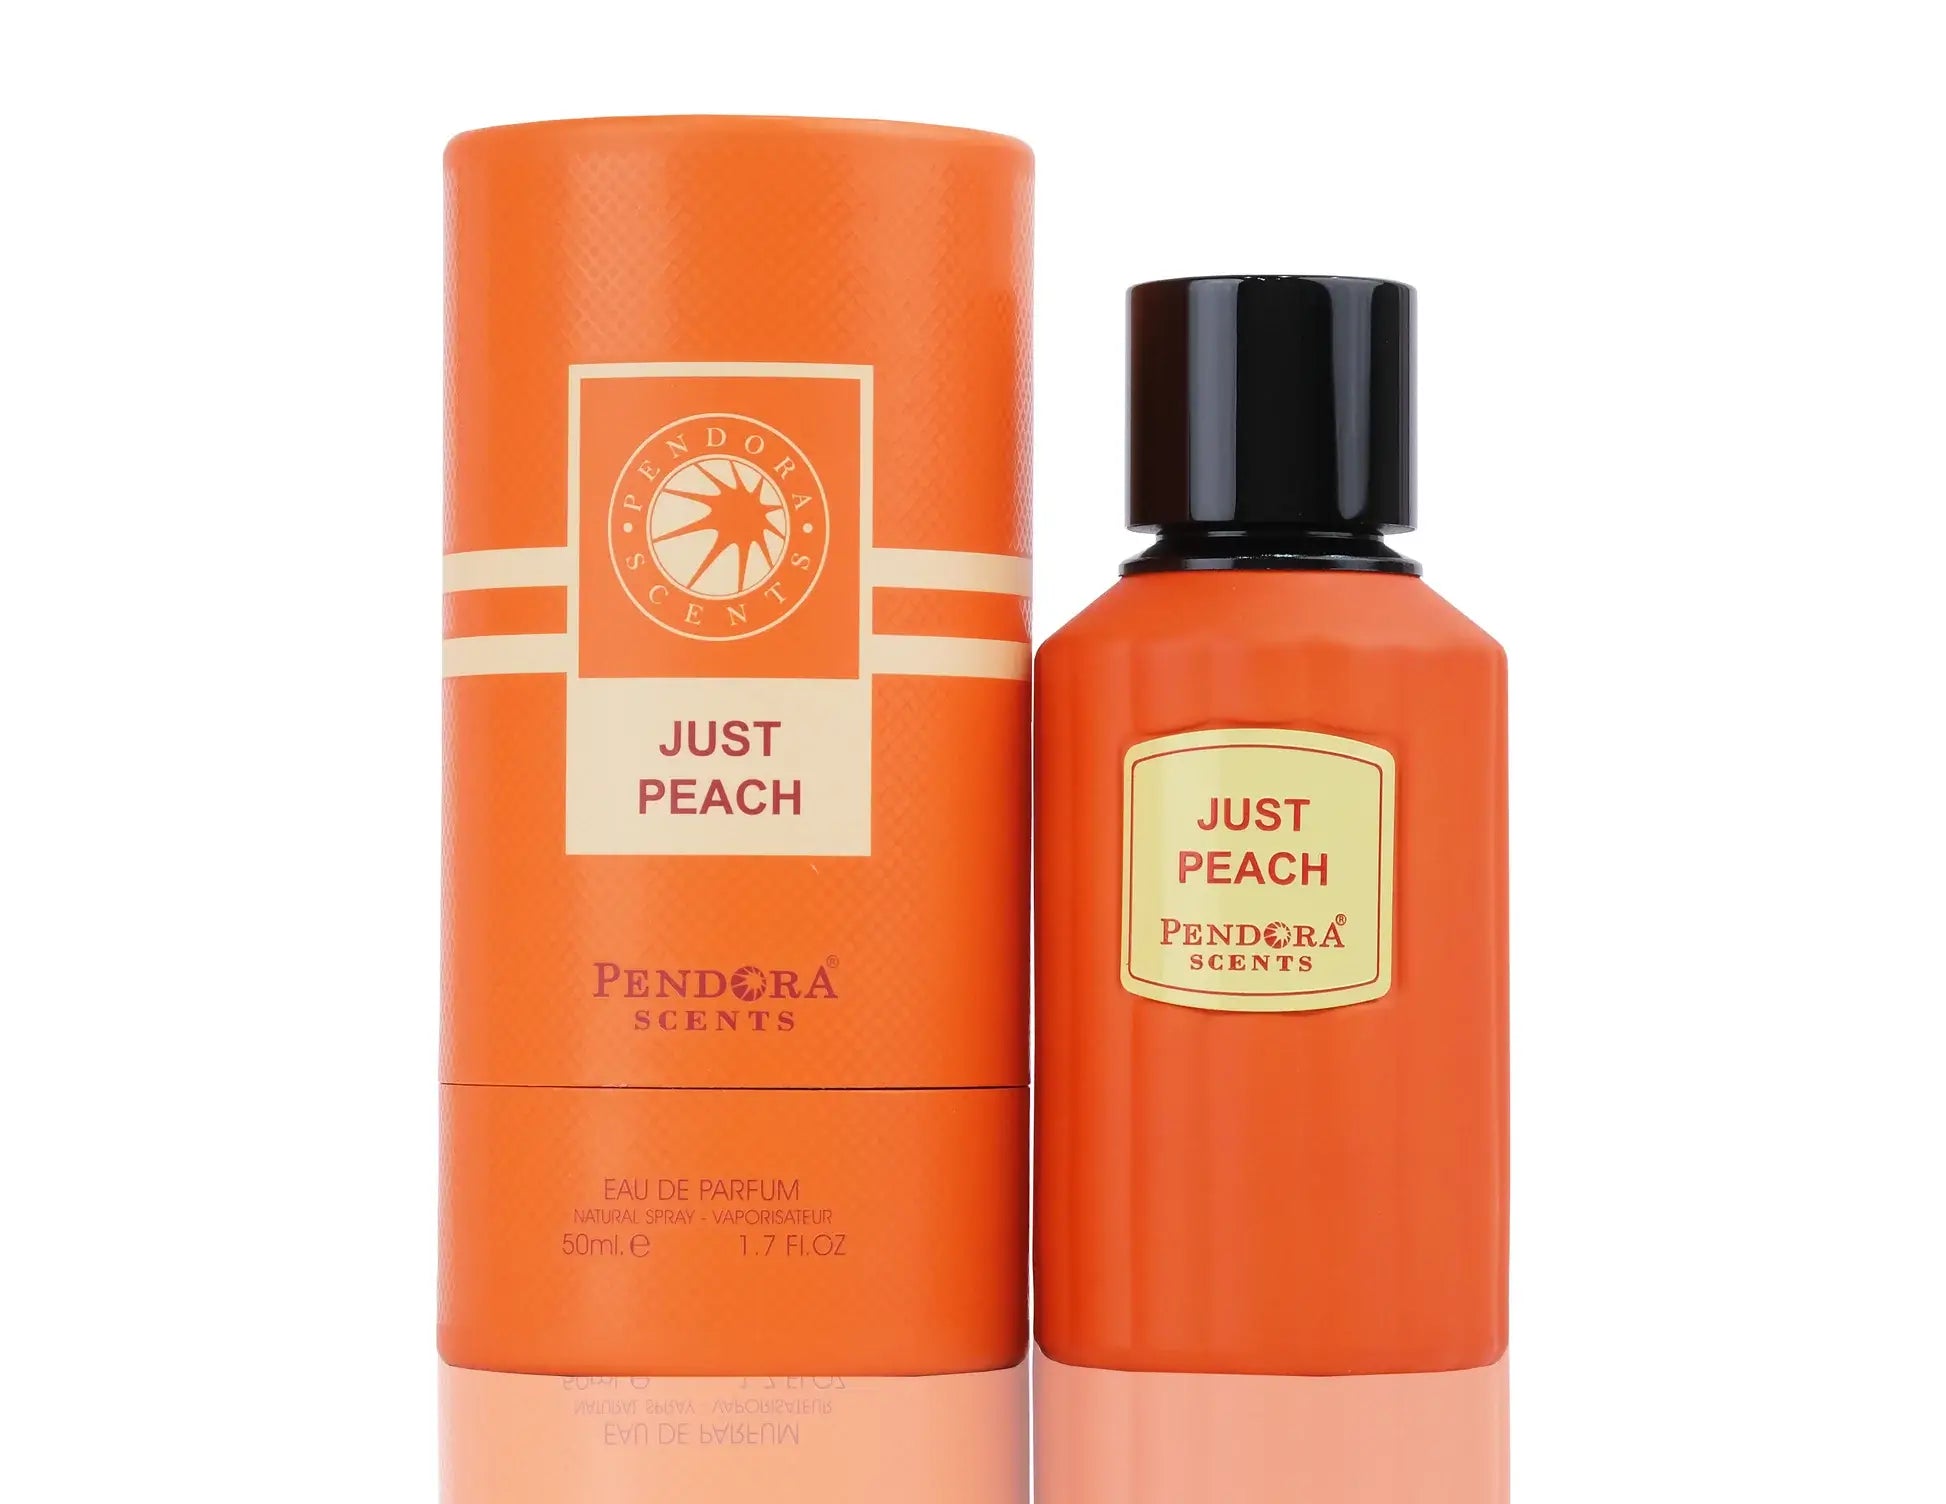  Just Peach 50ml fragrance for men and women